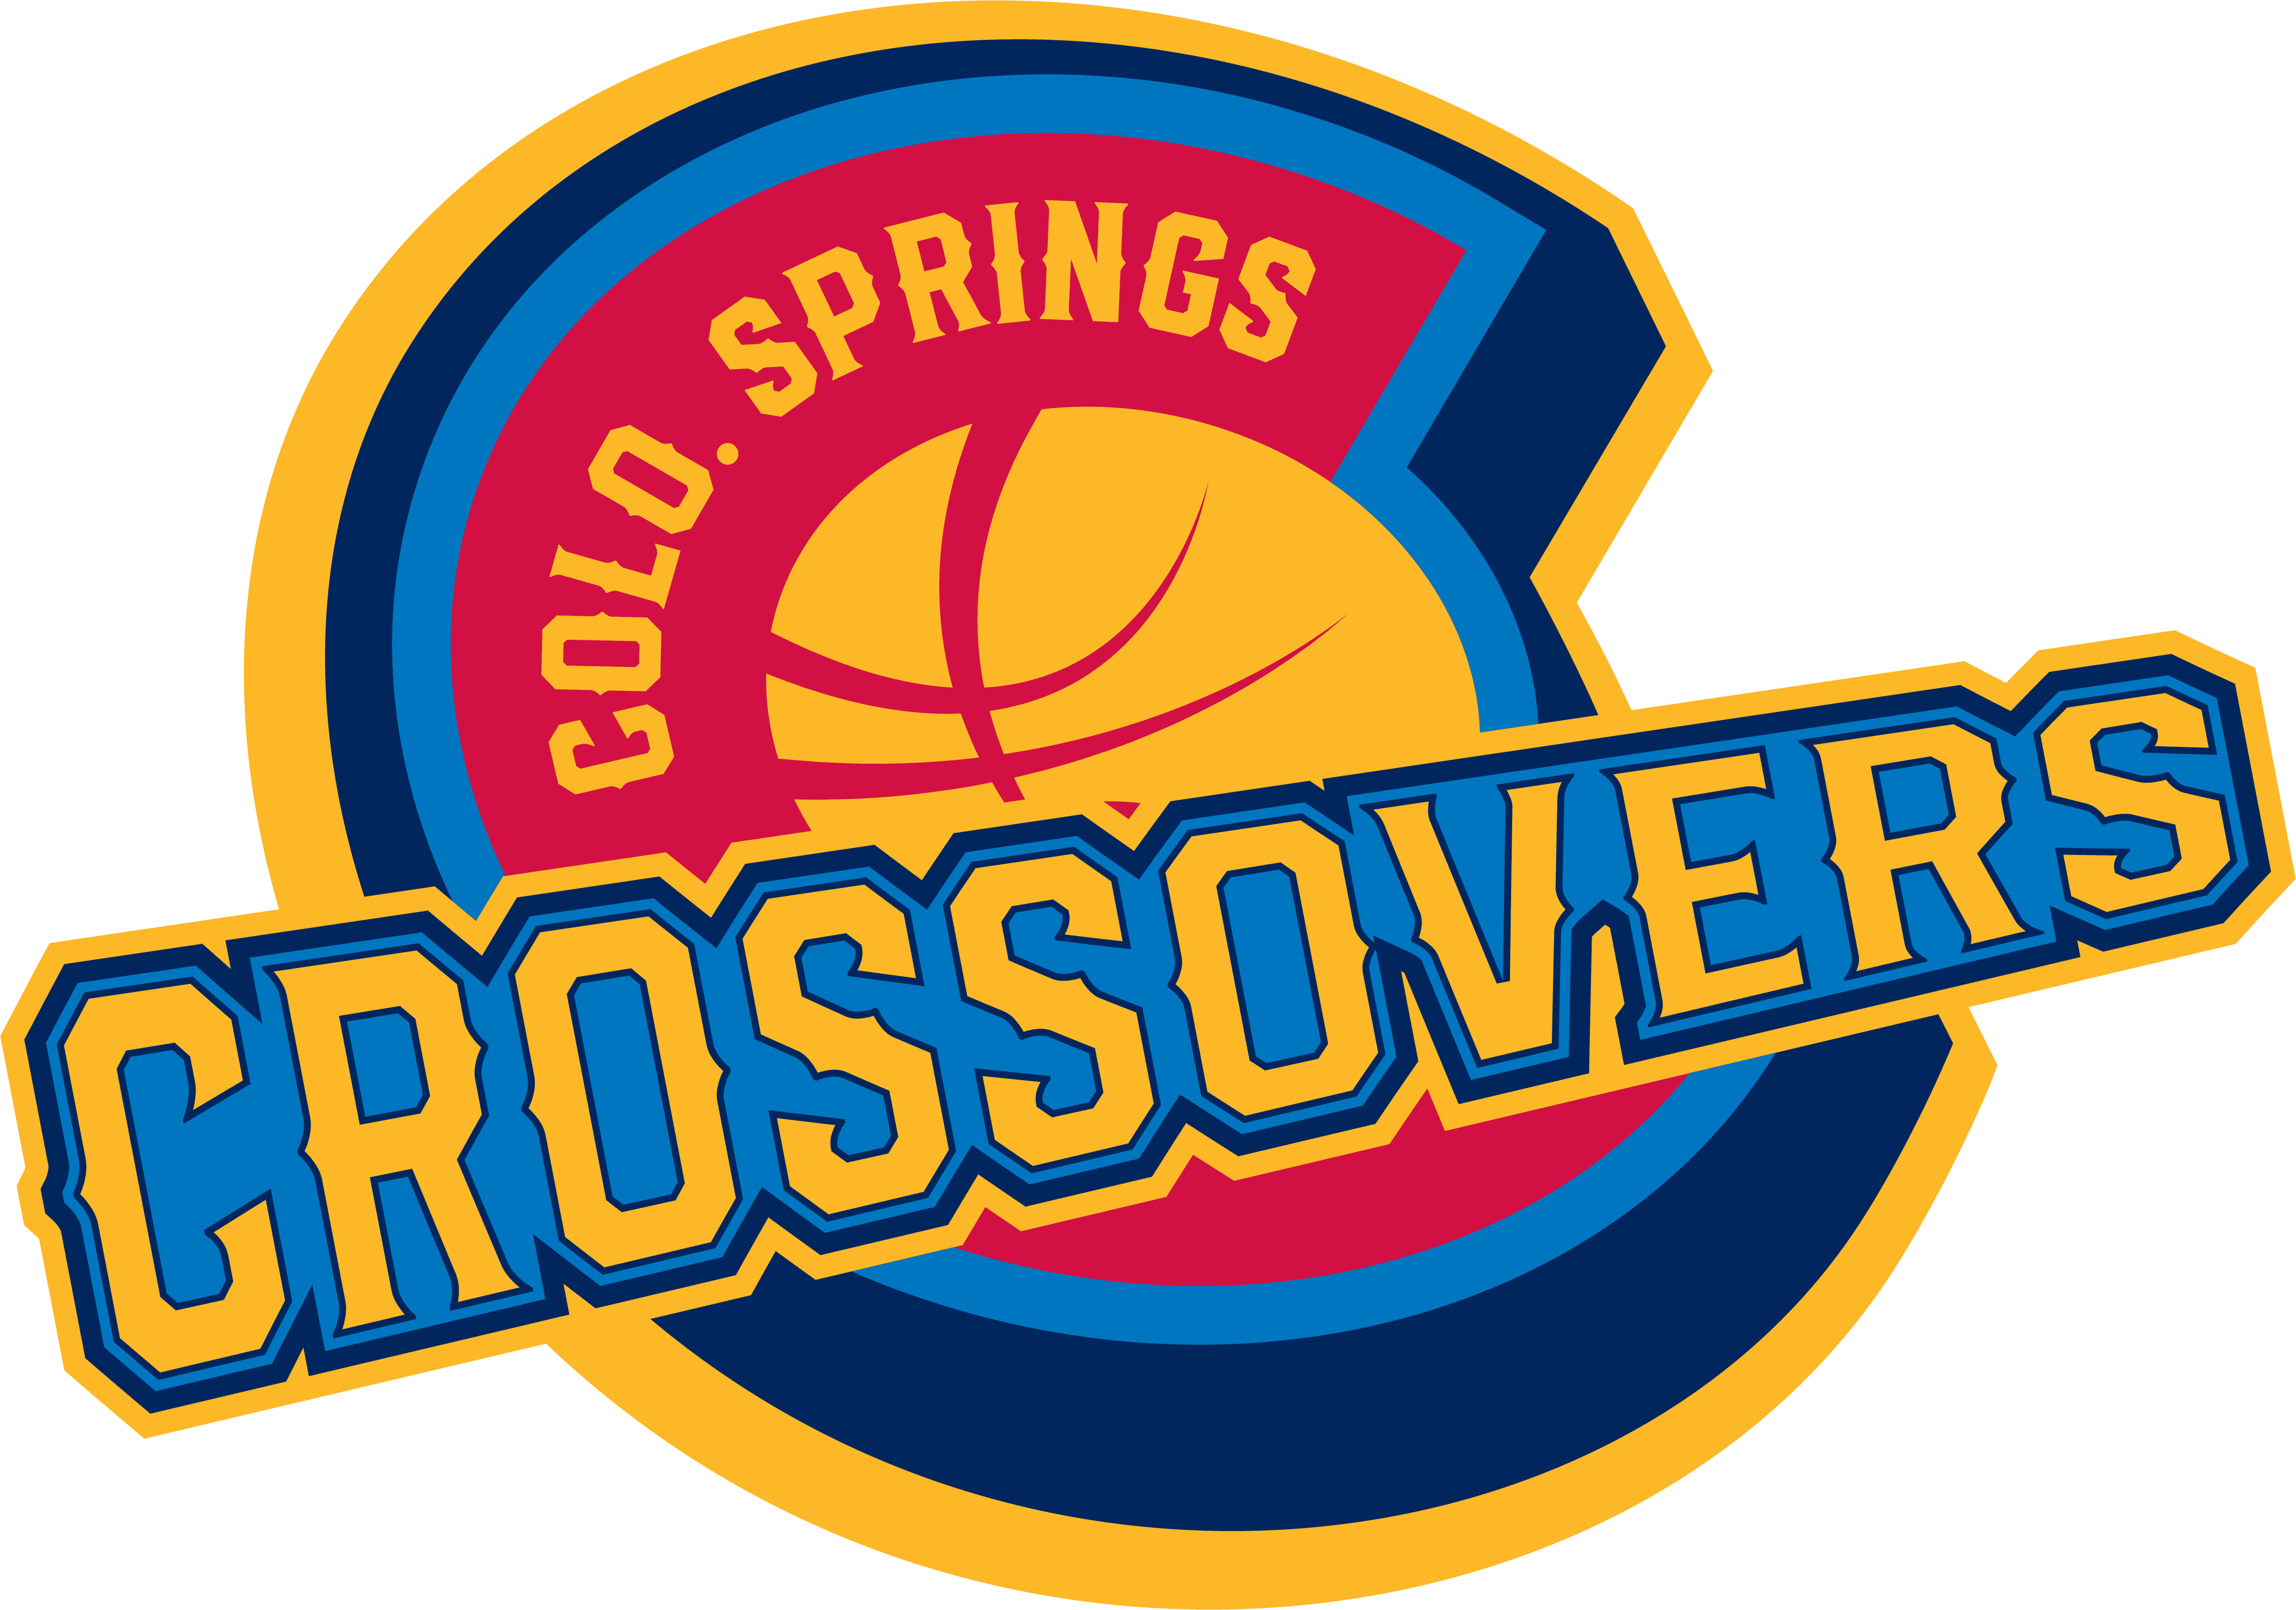 COLORADO CROSSOVERS JOIN THE ABA FOR UPCOMING SEASON